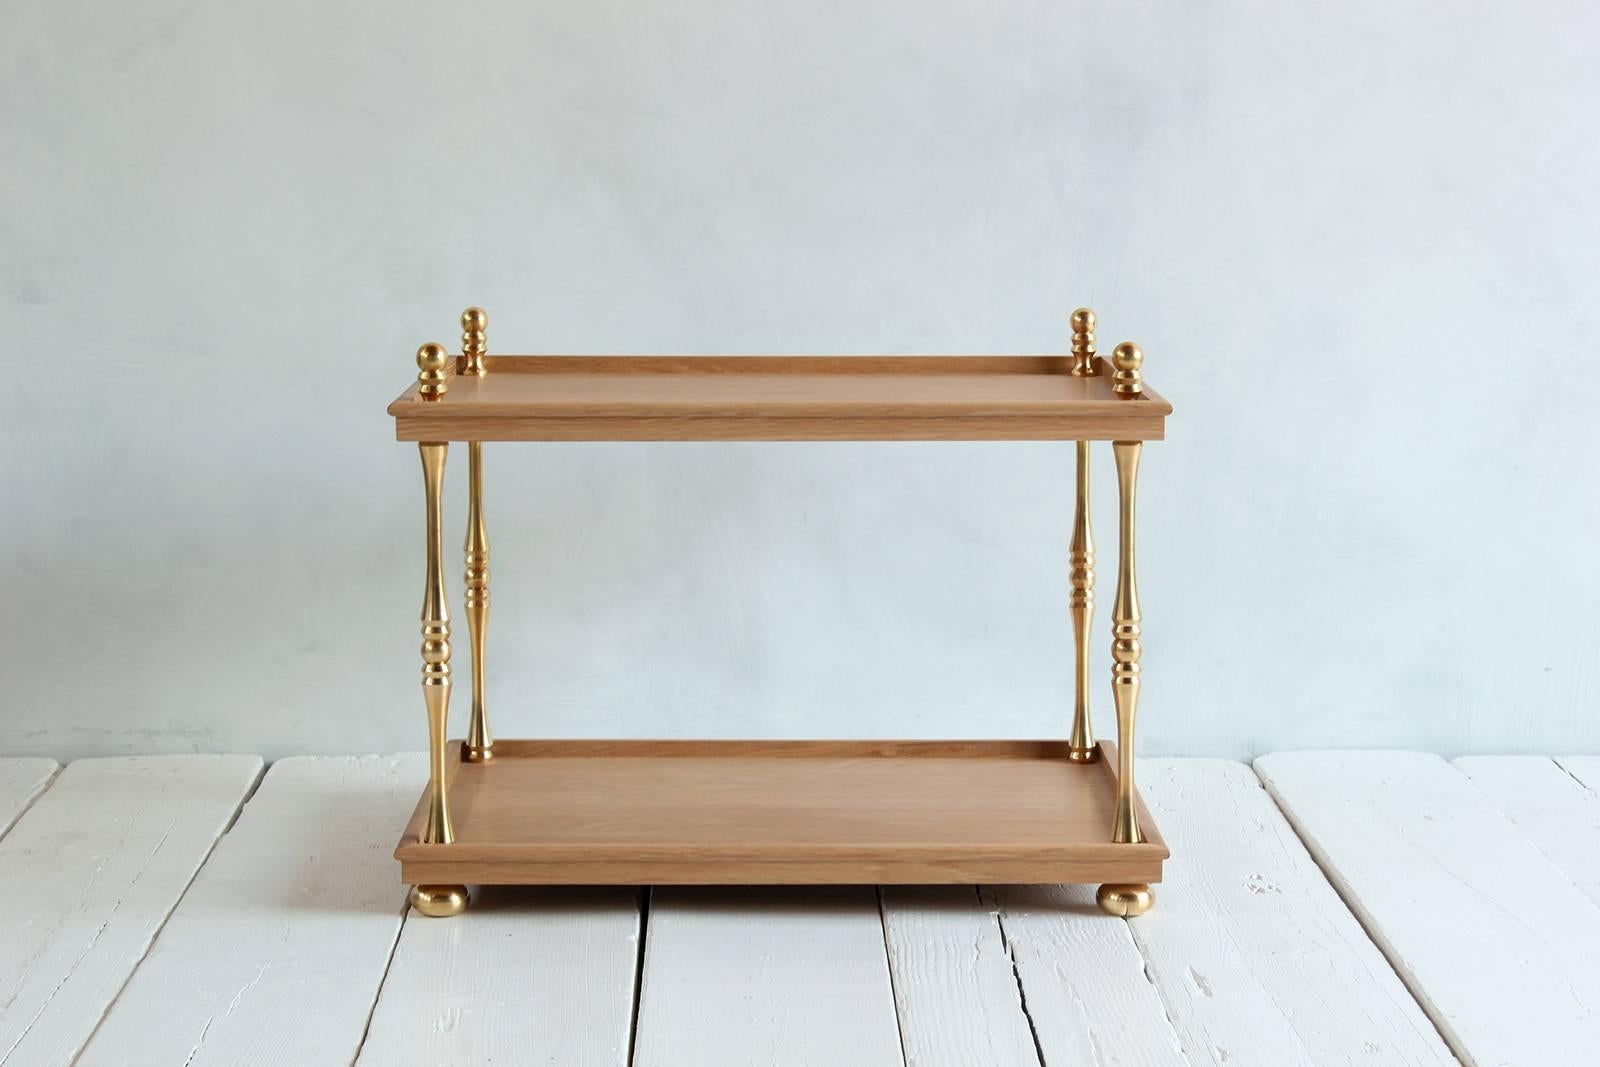 Turned brass side table made of solid unlacquered brass turned finials. Tabletop and base are made of solid white oak.